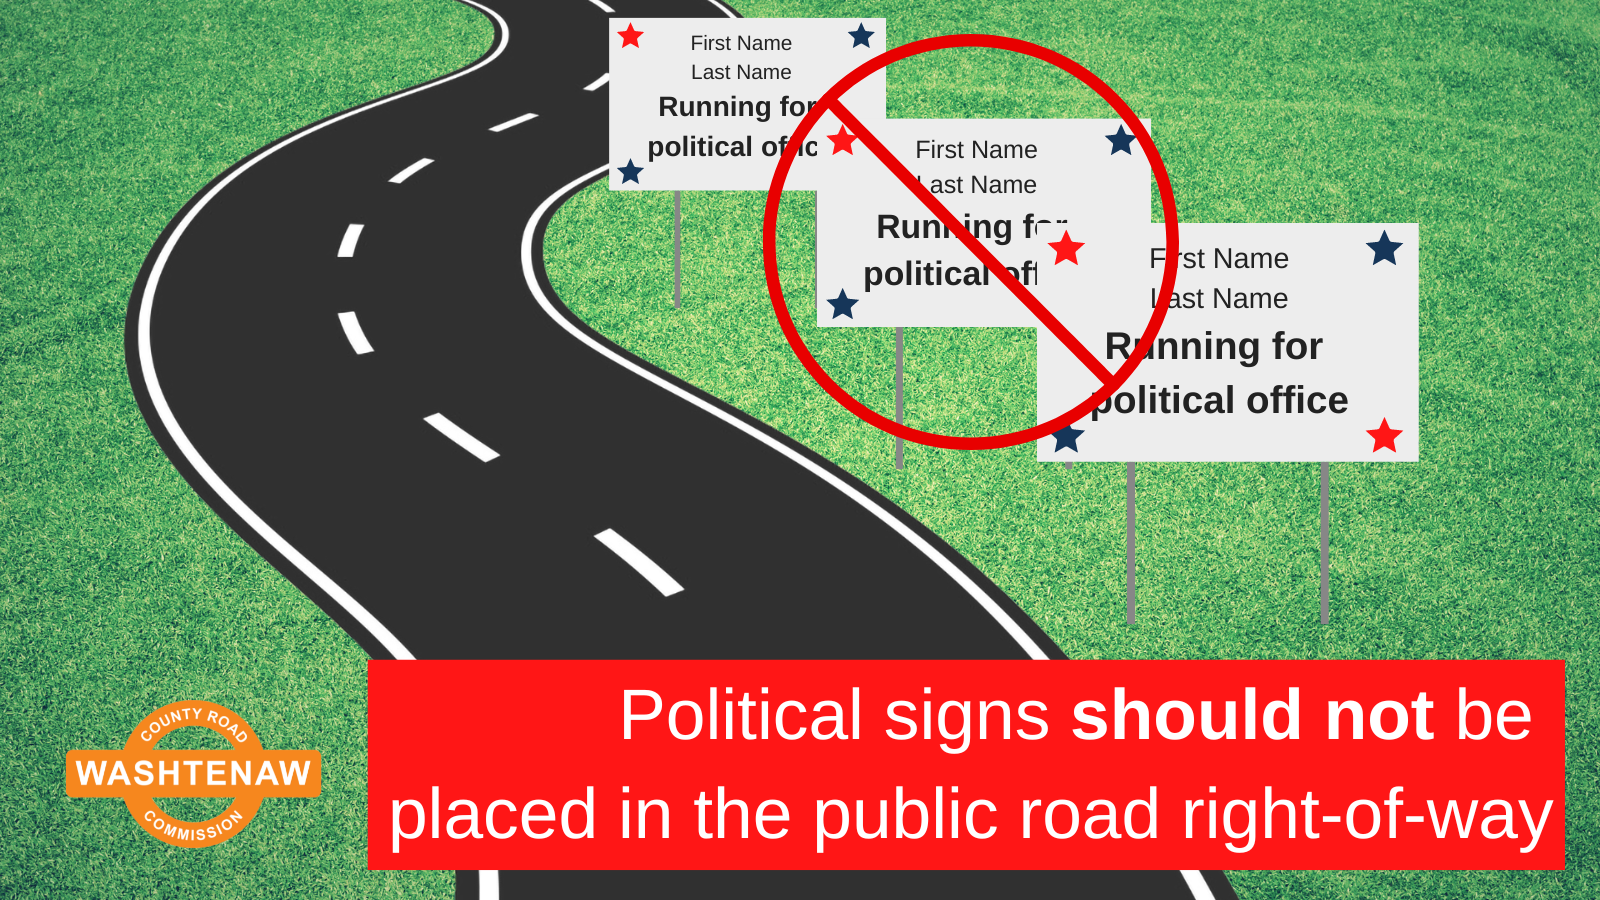 graphic showing that political signs should not be posted in the ROW